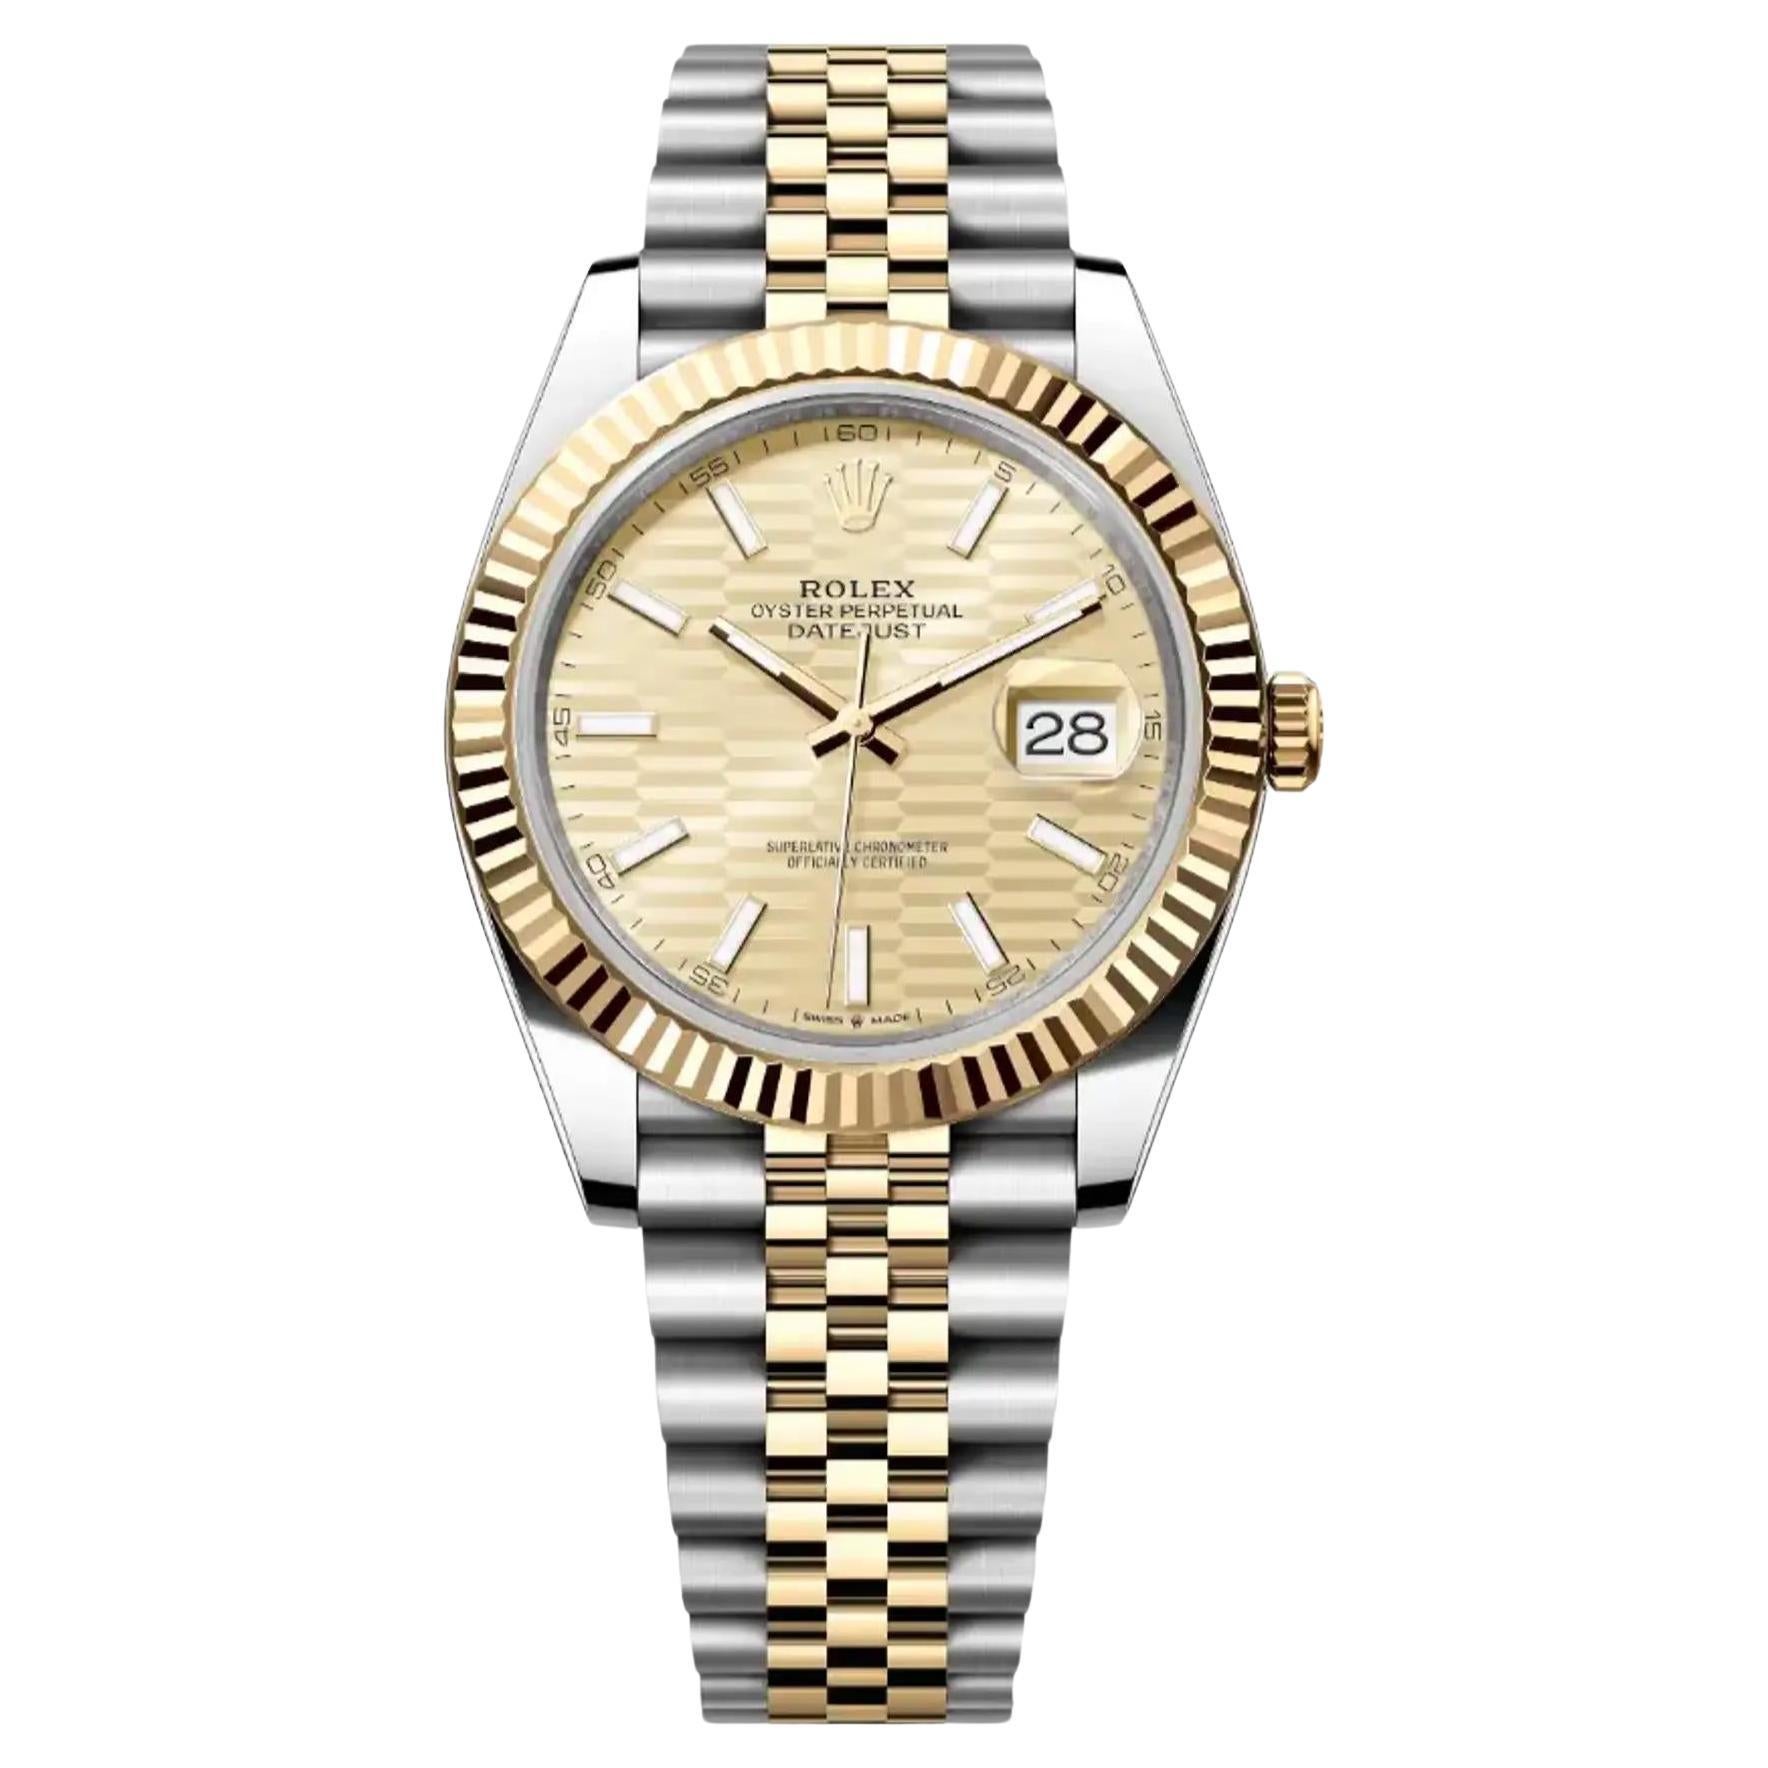 NEW Rolex Datejust 18K Yellow Gold Steel Champagne Motif Dial Watch 126333 For Sale